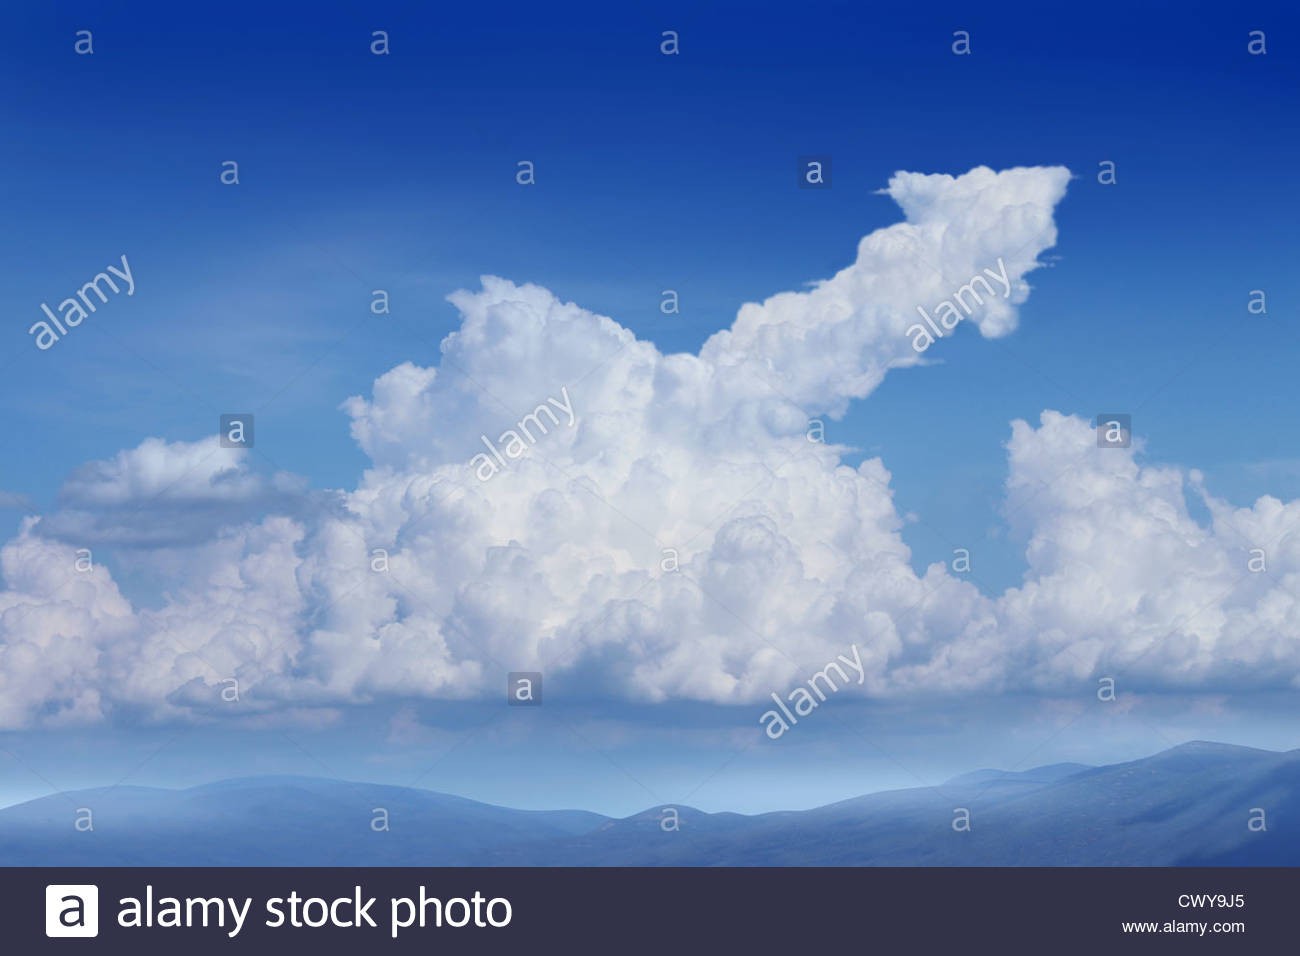 Success Dreams With A Blue Sky Background And Cumulus Cloud In